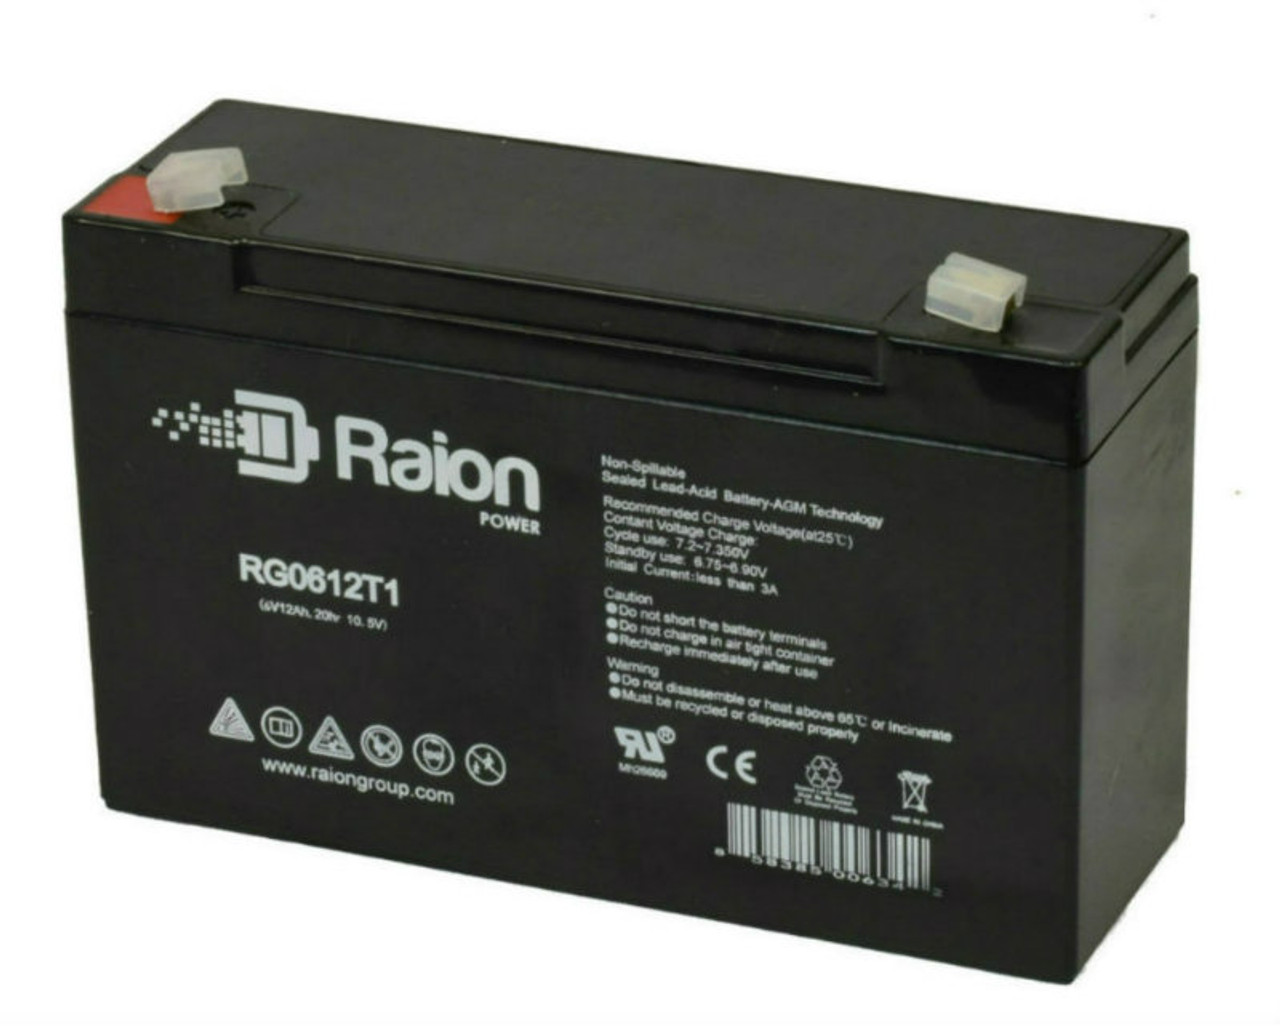 Raion Power RG06120T1 Replacement Battery for Japan PE10-6R